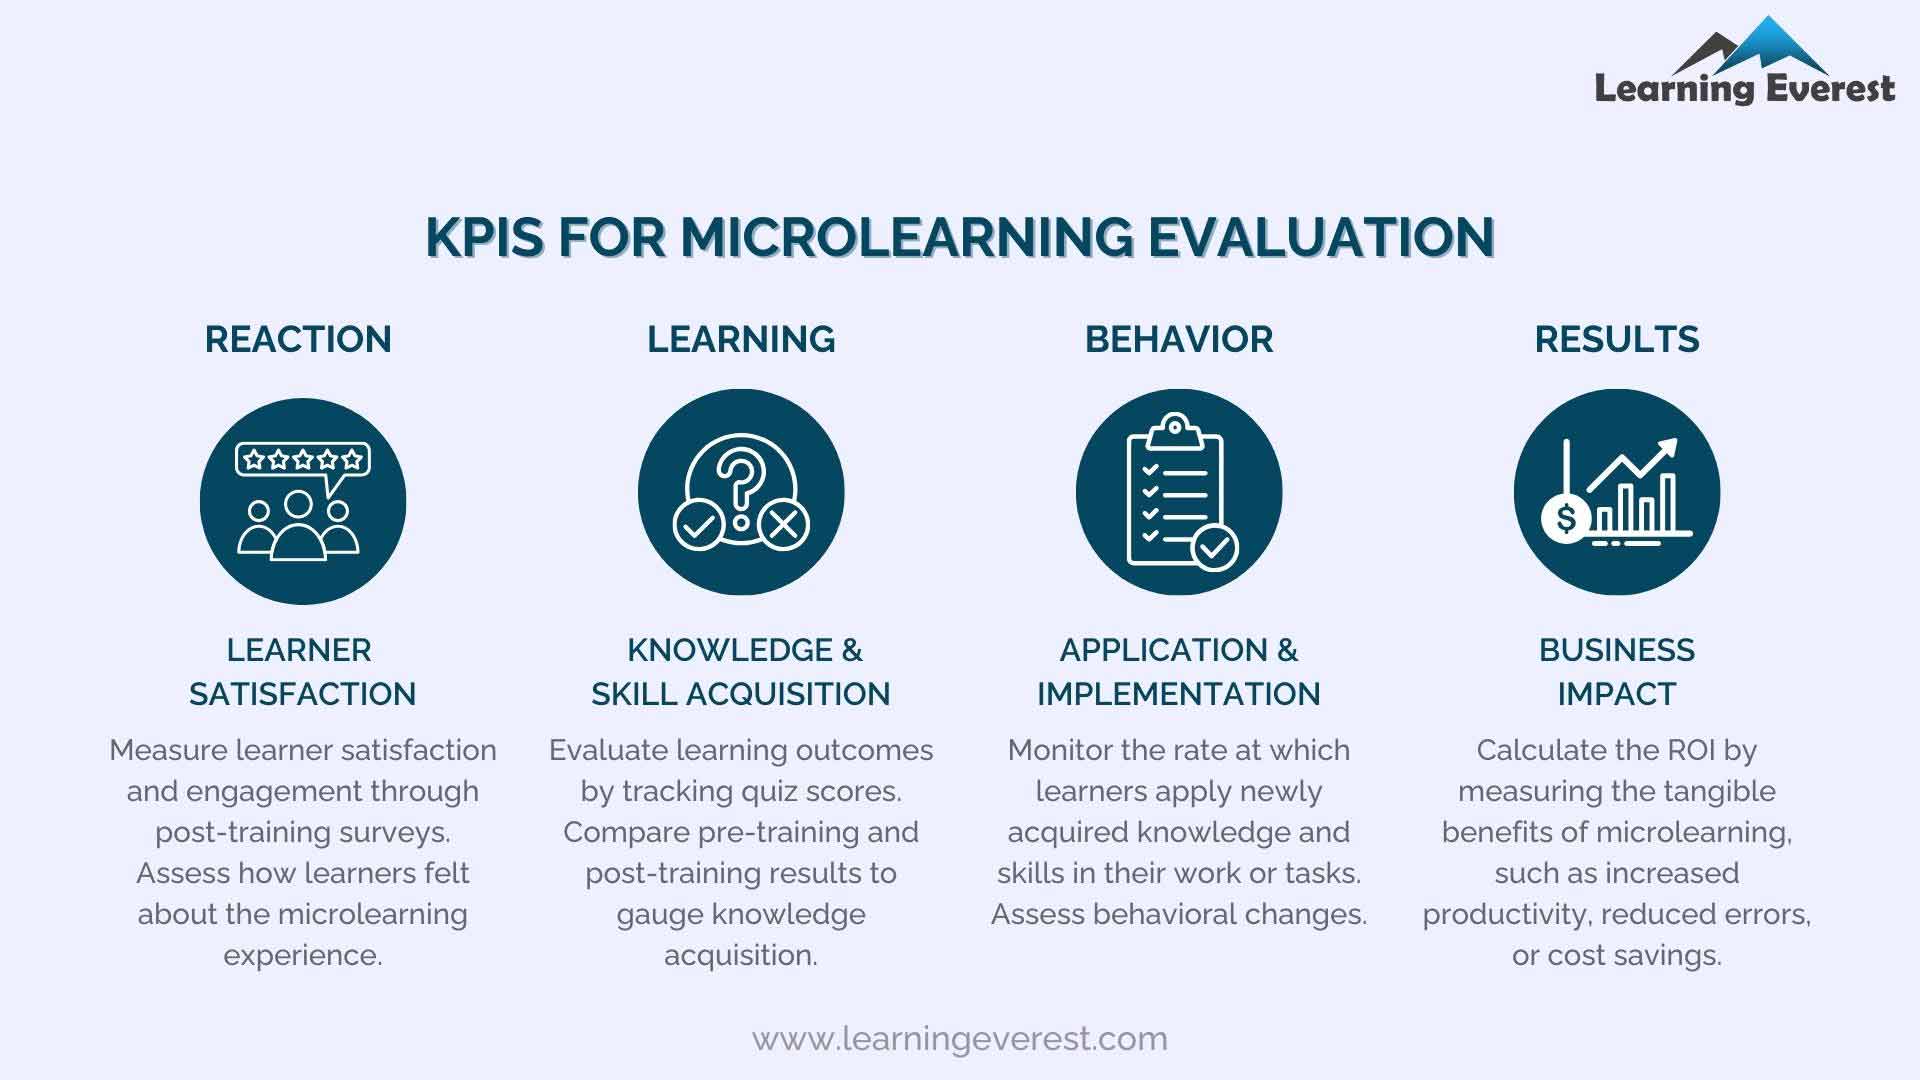 Kirkpatrick Training Evaluation Model and KPIs to Measure Microlearning Outcomes